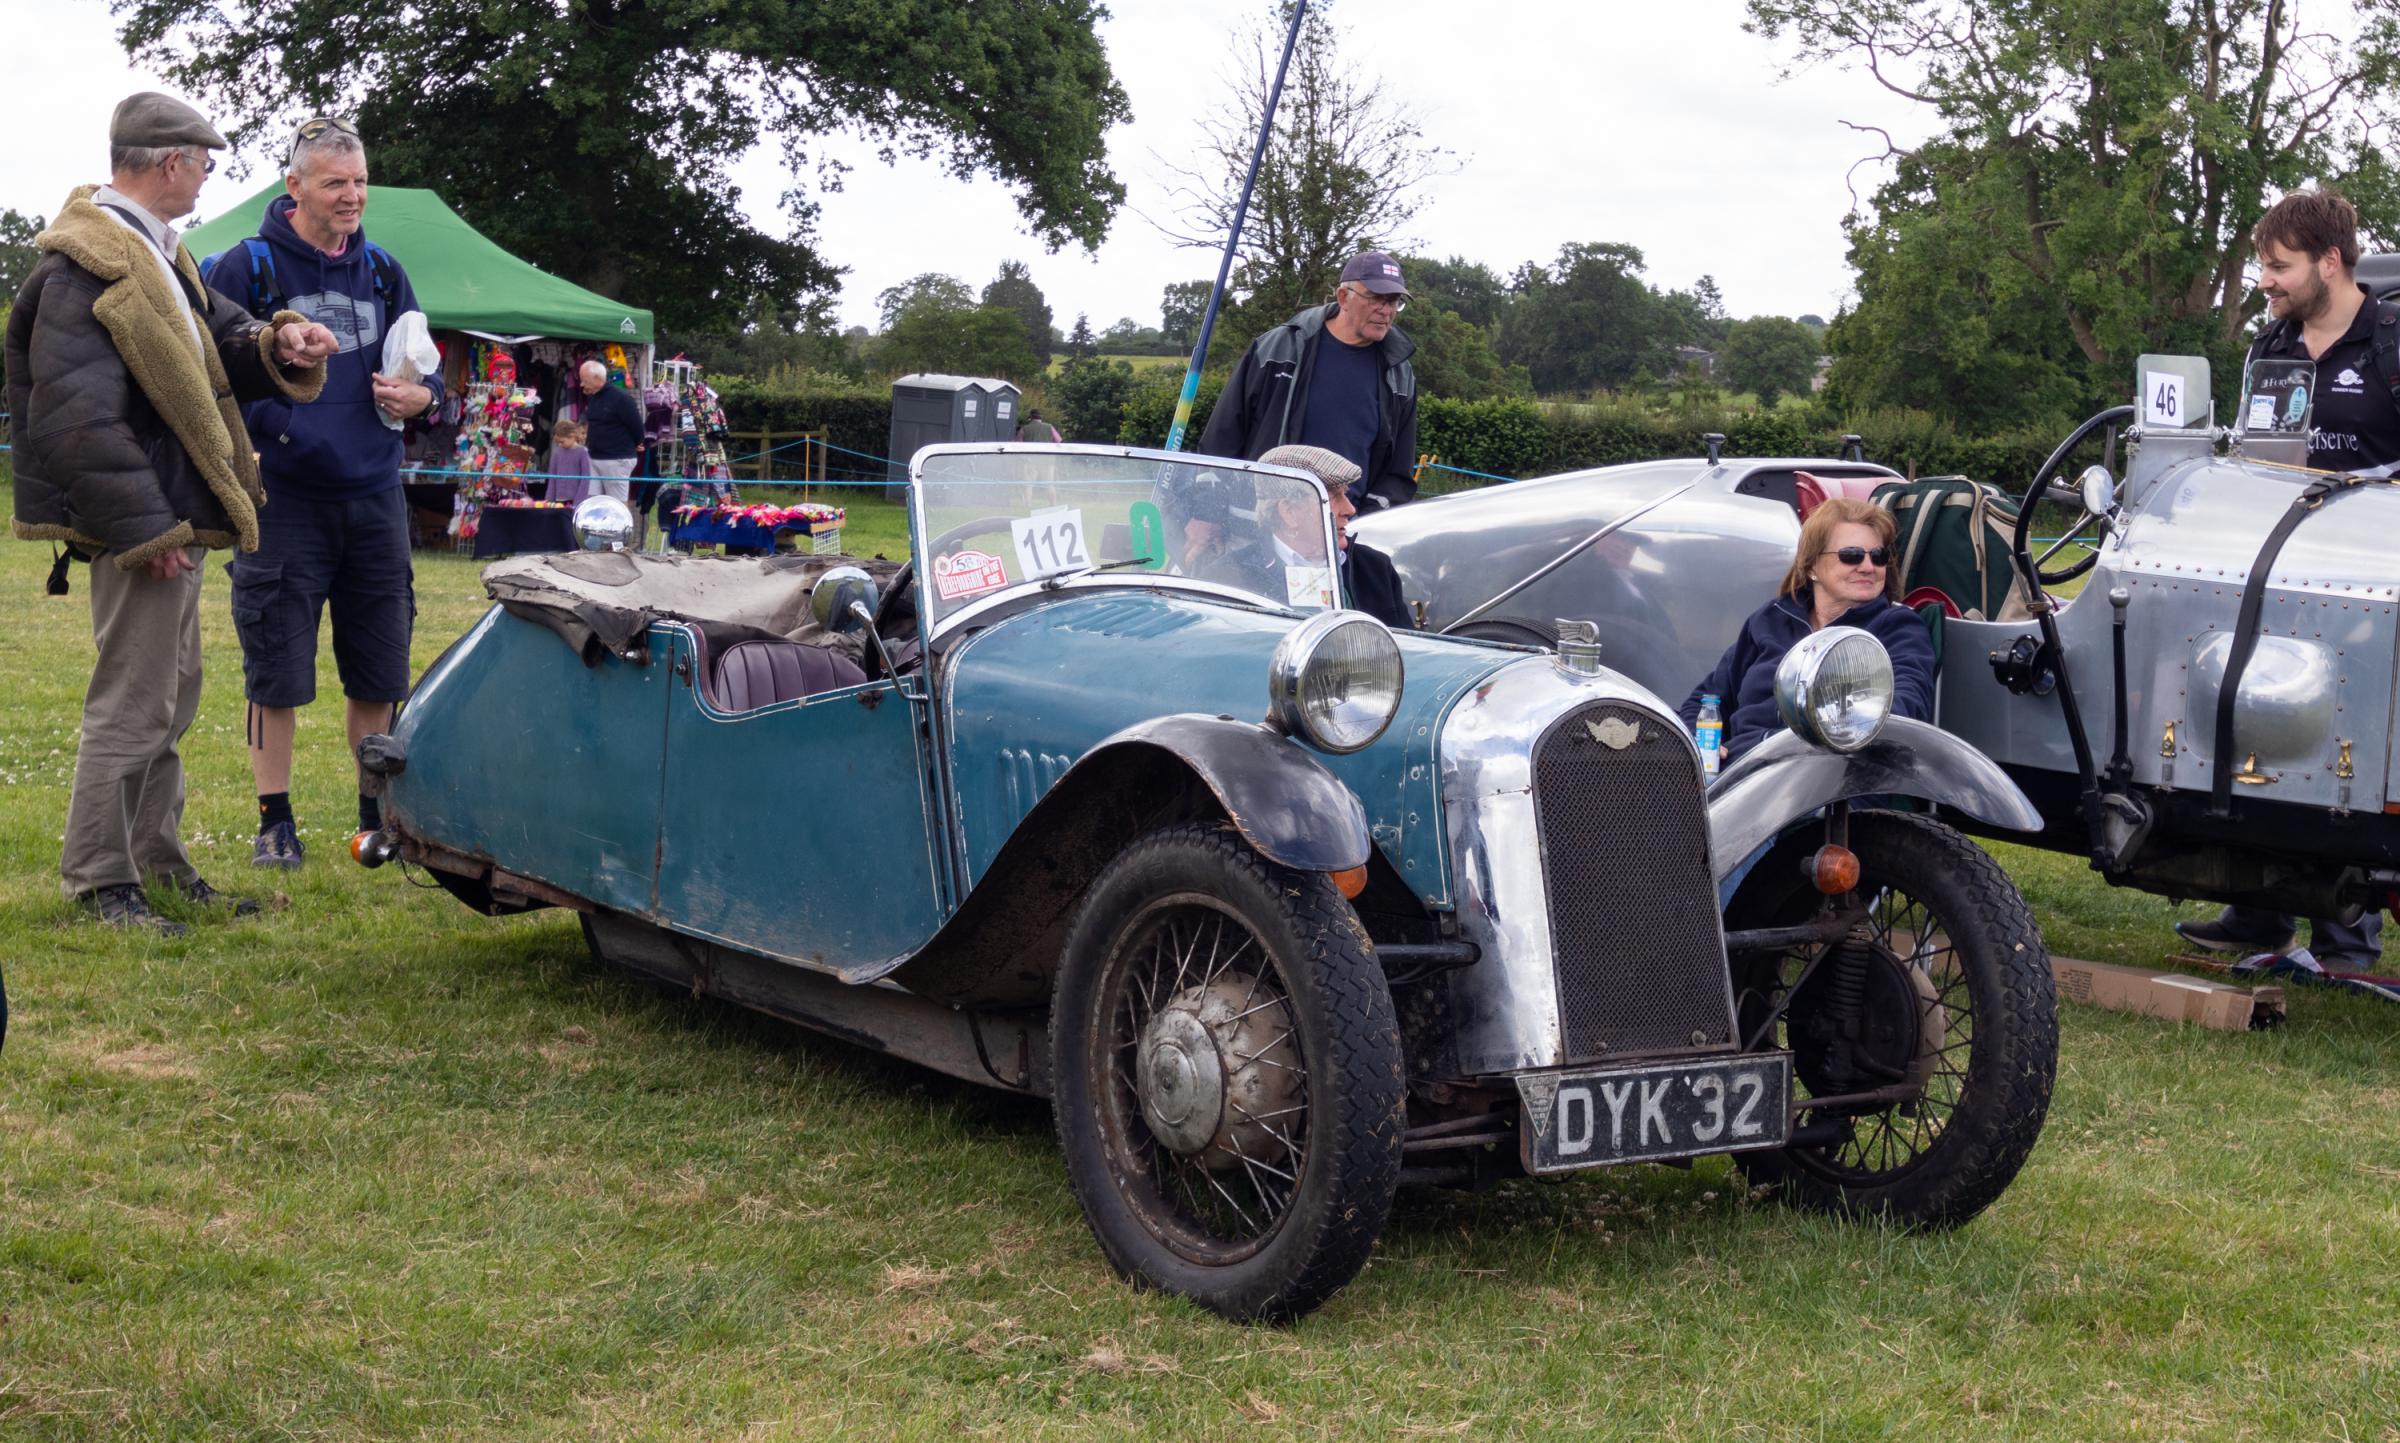 A 1937 Morgan car pictured at the Bromyard Gala 2022. Picture: Sofie Smith